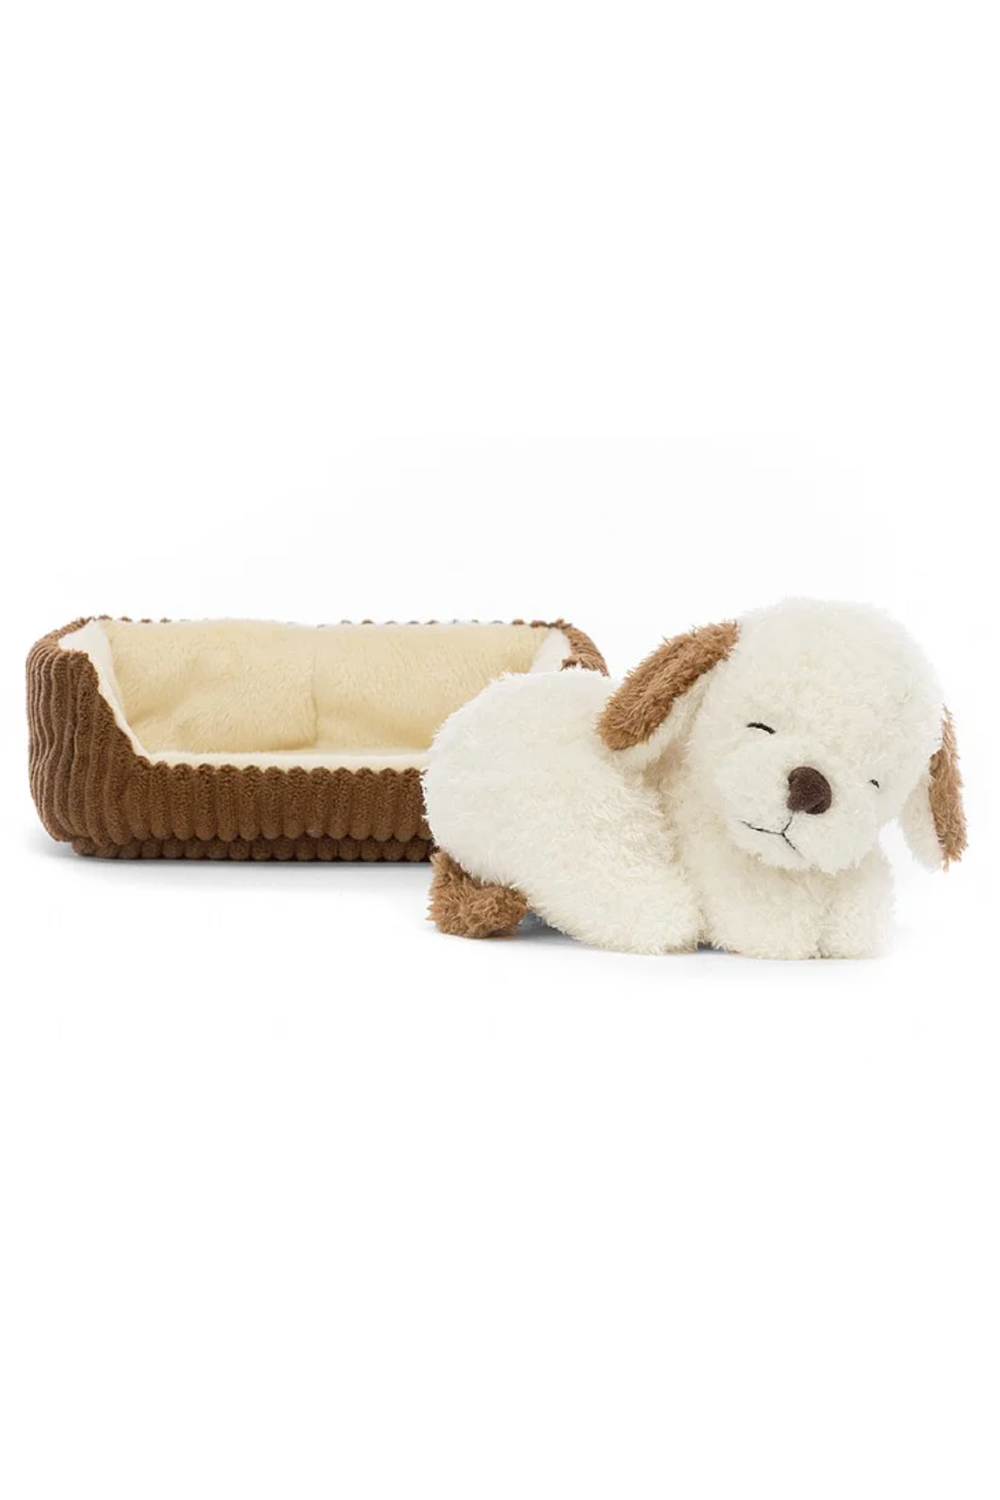 JELLYCAT Napping Nipper Dog